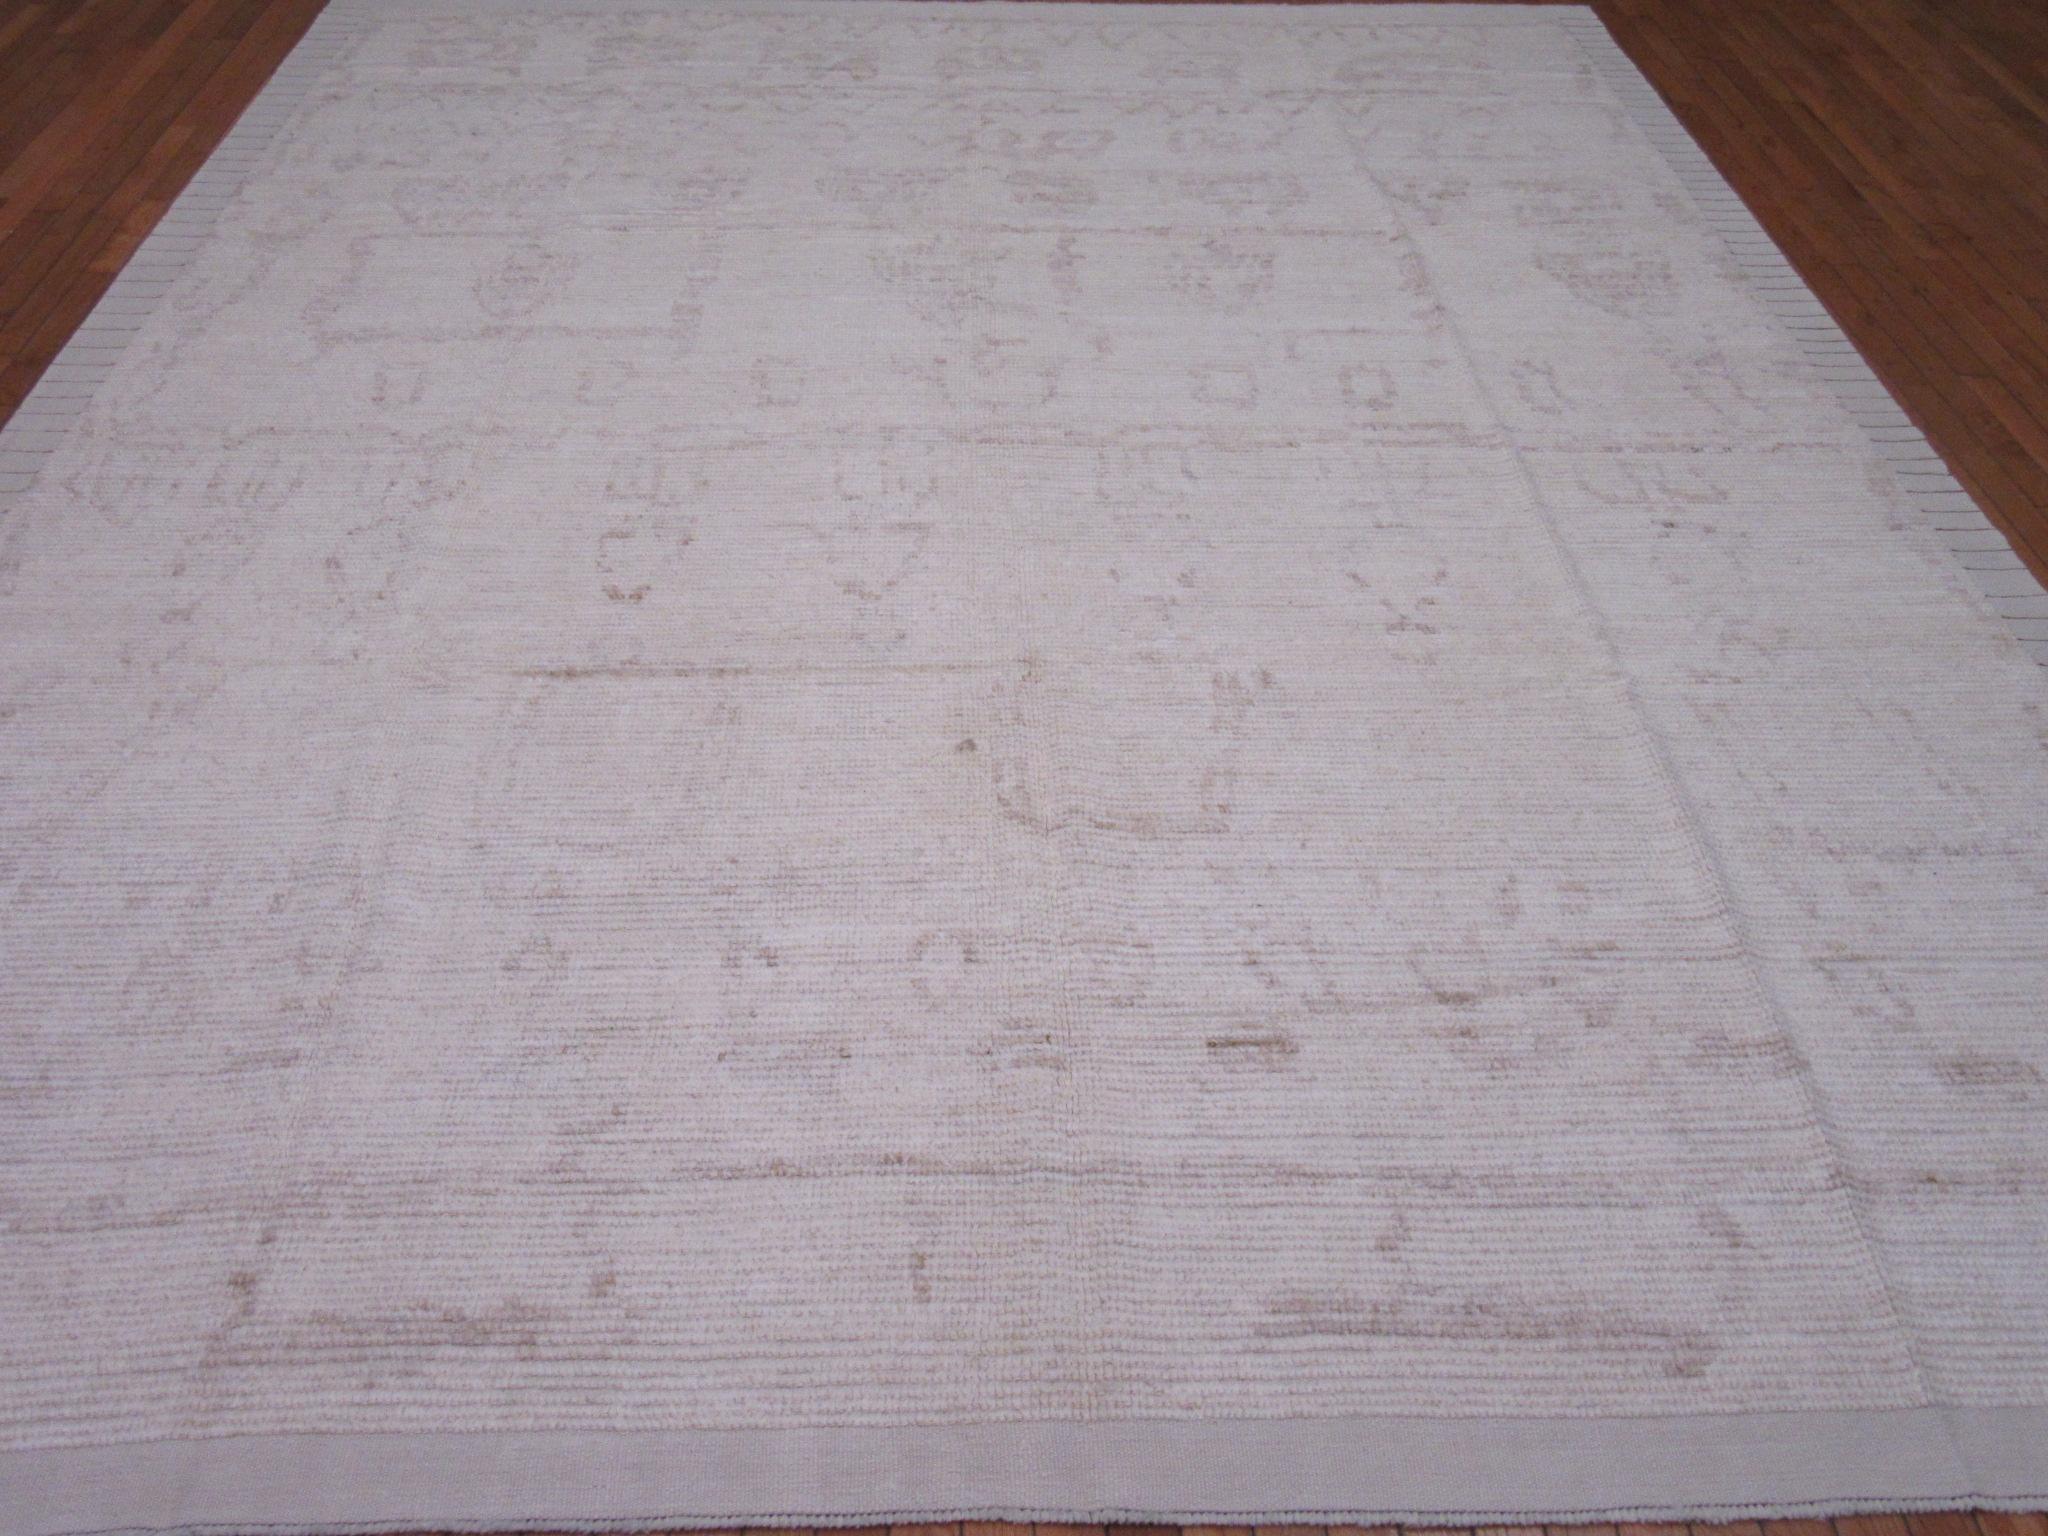 This is a new hand knotted Tulu rug made with good quality wool from Turkey. It has a fluffy long hair pile common with these types of rugs. It has a tribal design in soft mocha colors on an ivory background. It measures 9' 4'' x 12' 9''.